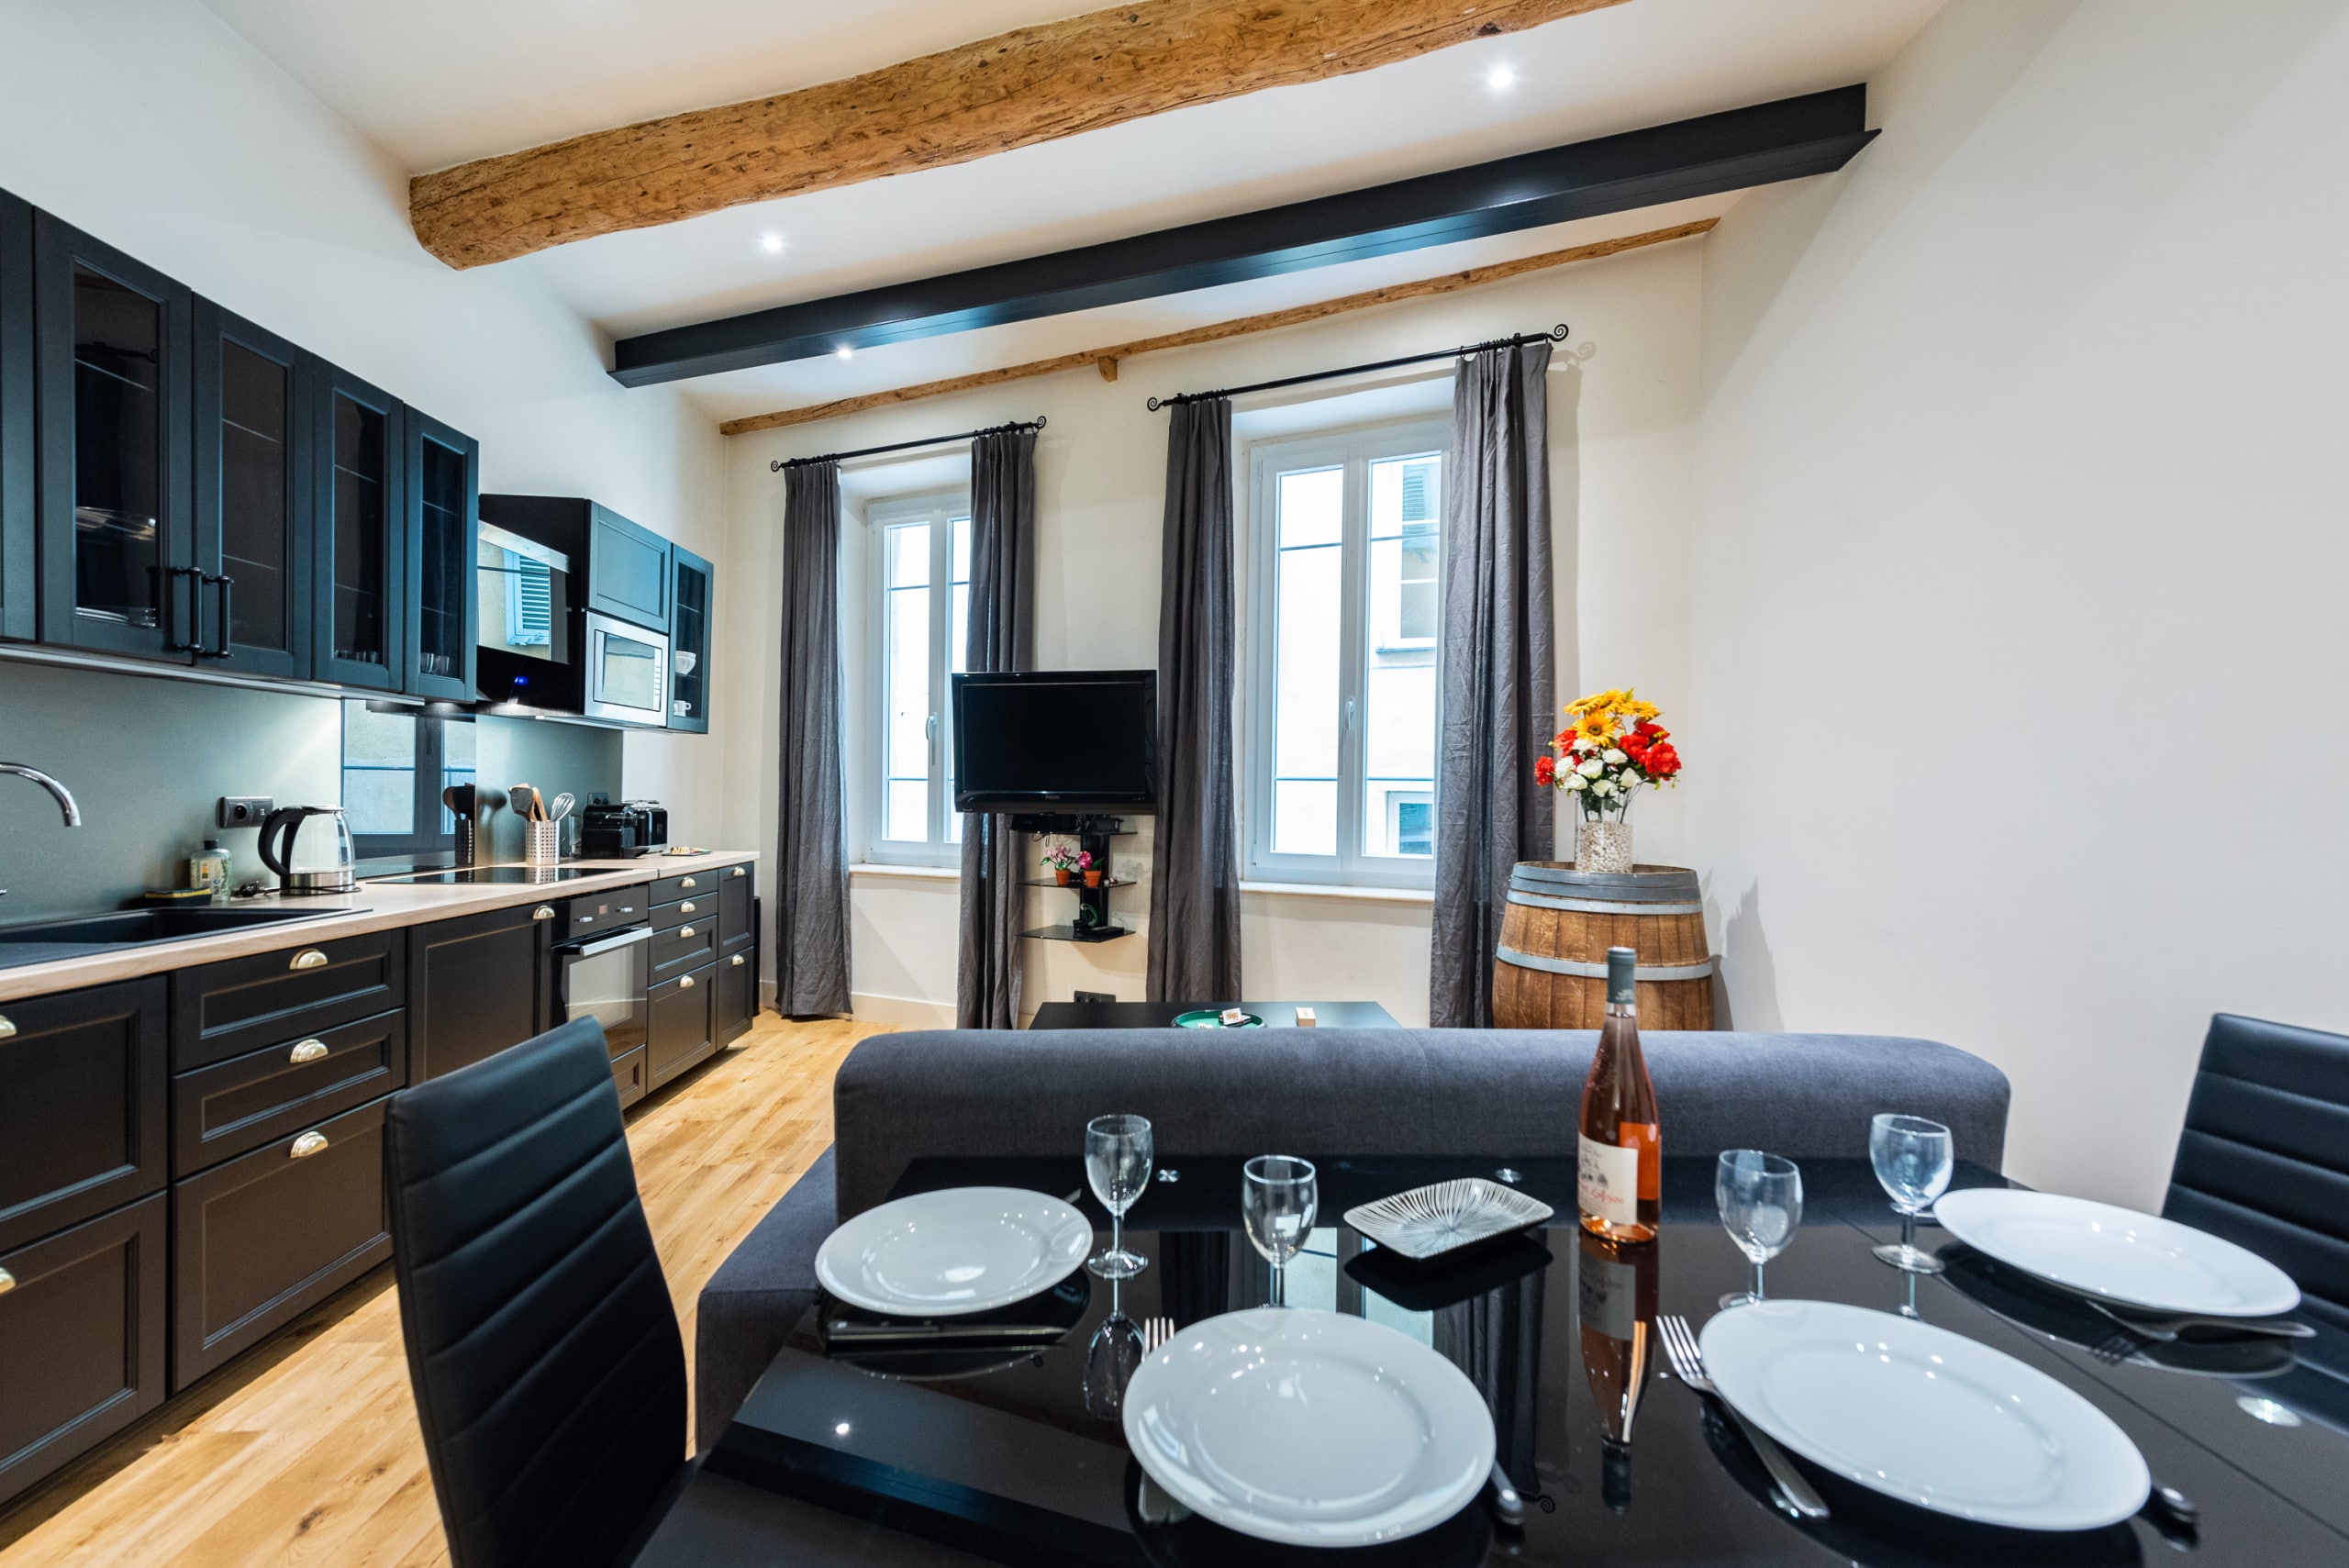 Stunning 1 bedroom flat in the heart of the old town